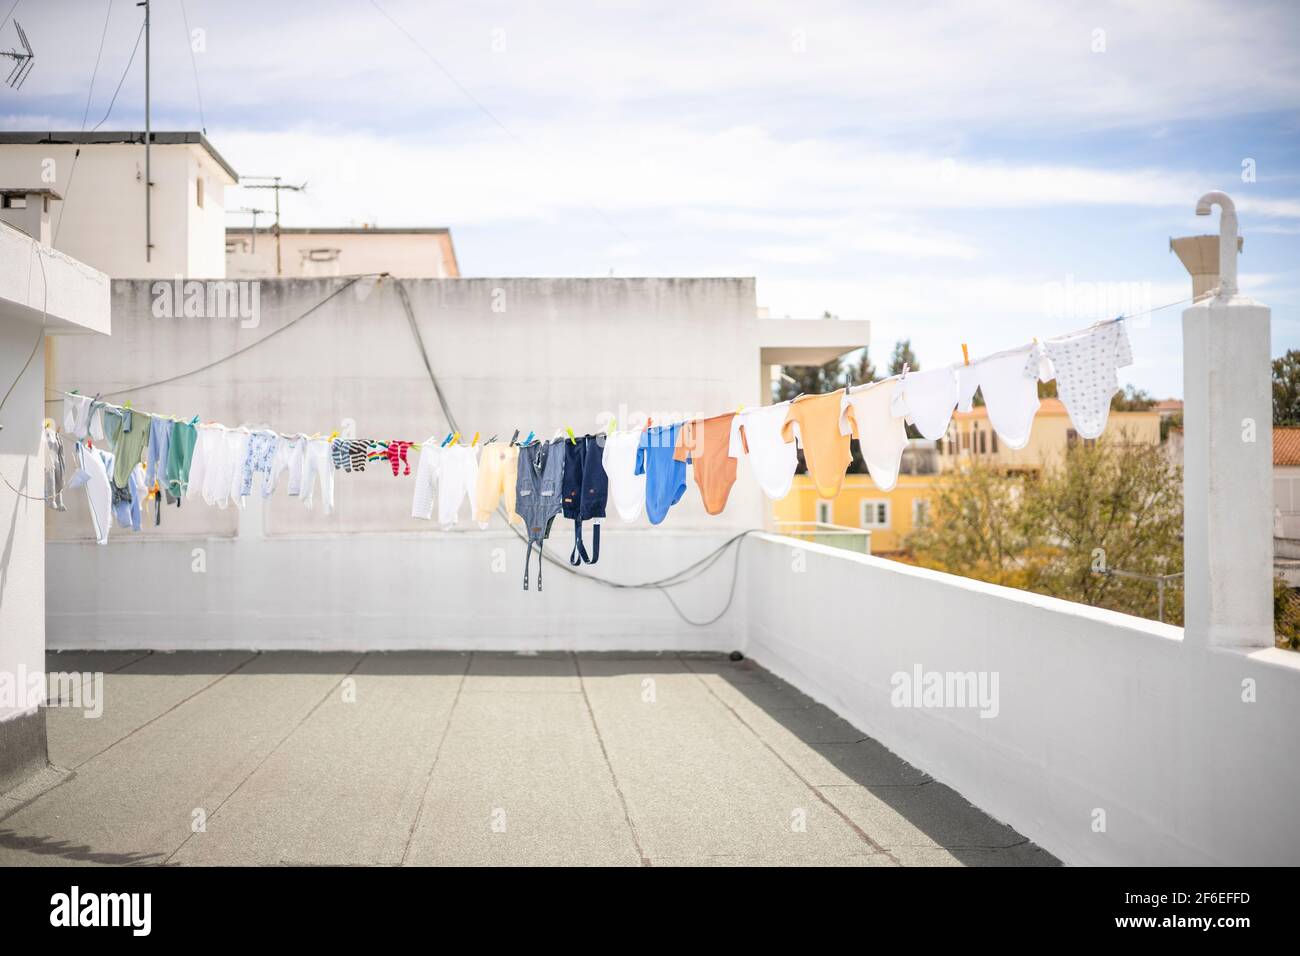 Drying a lot of baby clothes on the roof top in the city Stock Photo